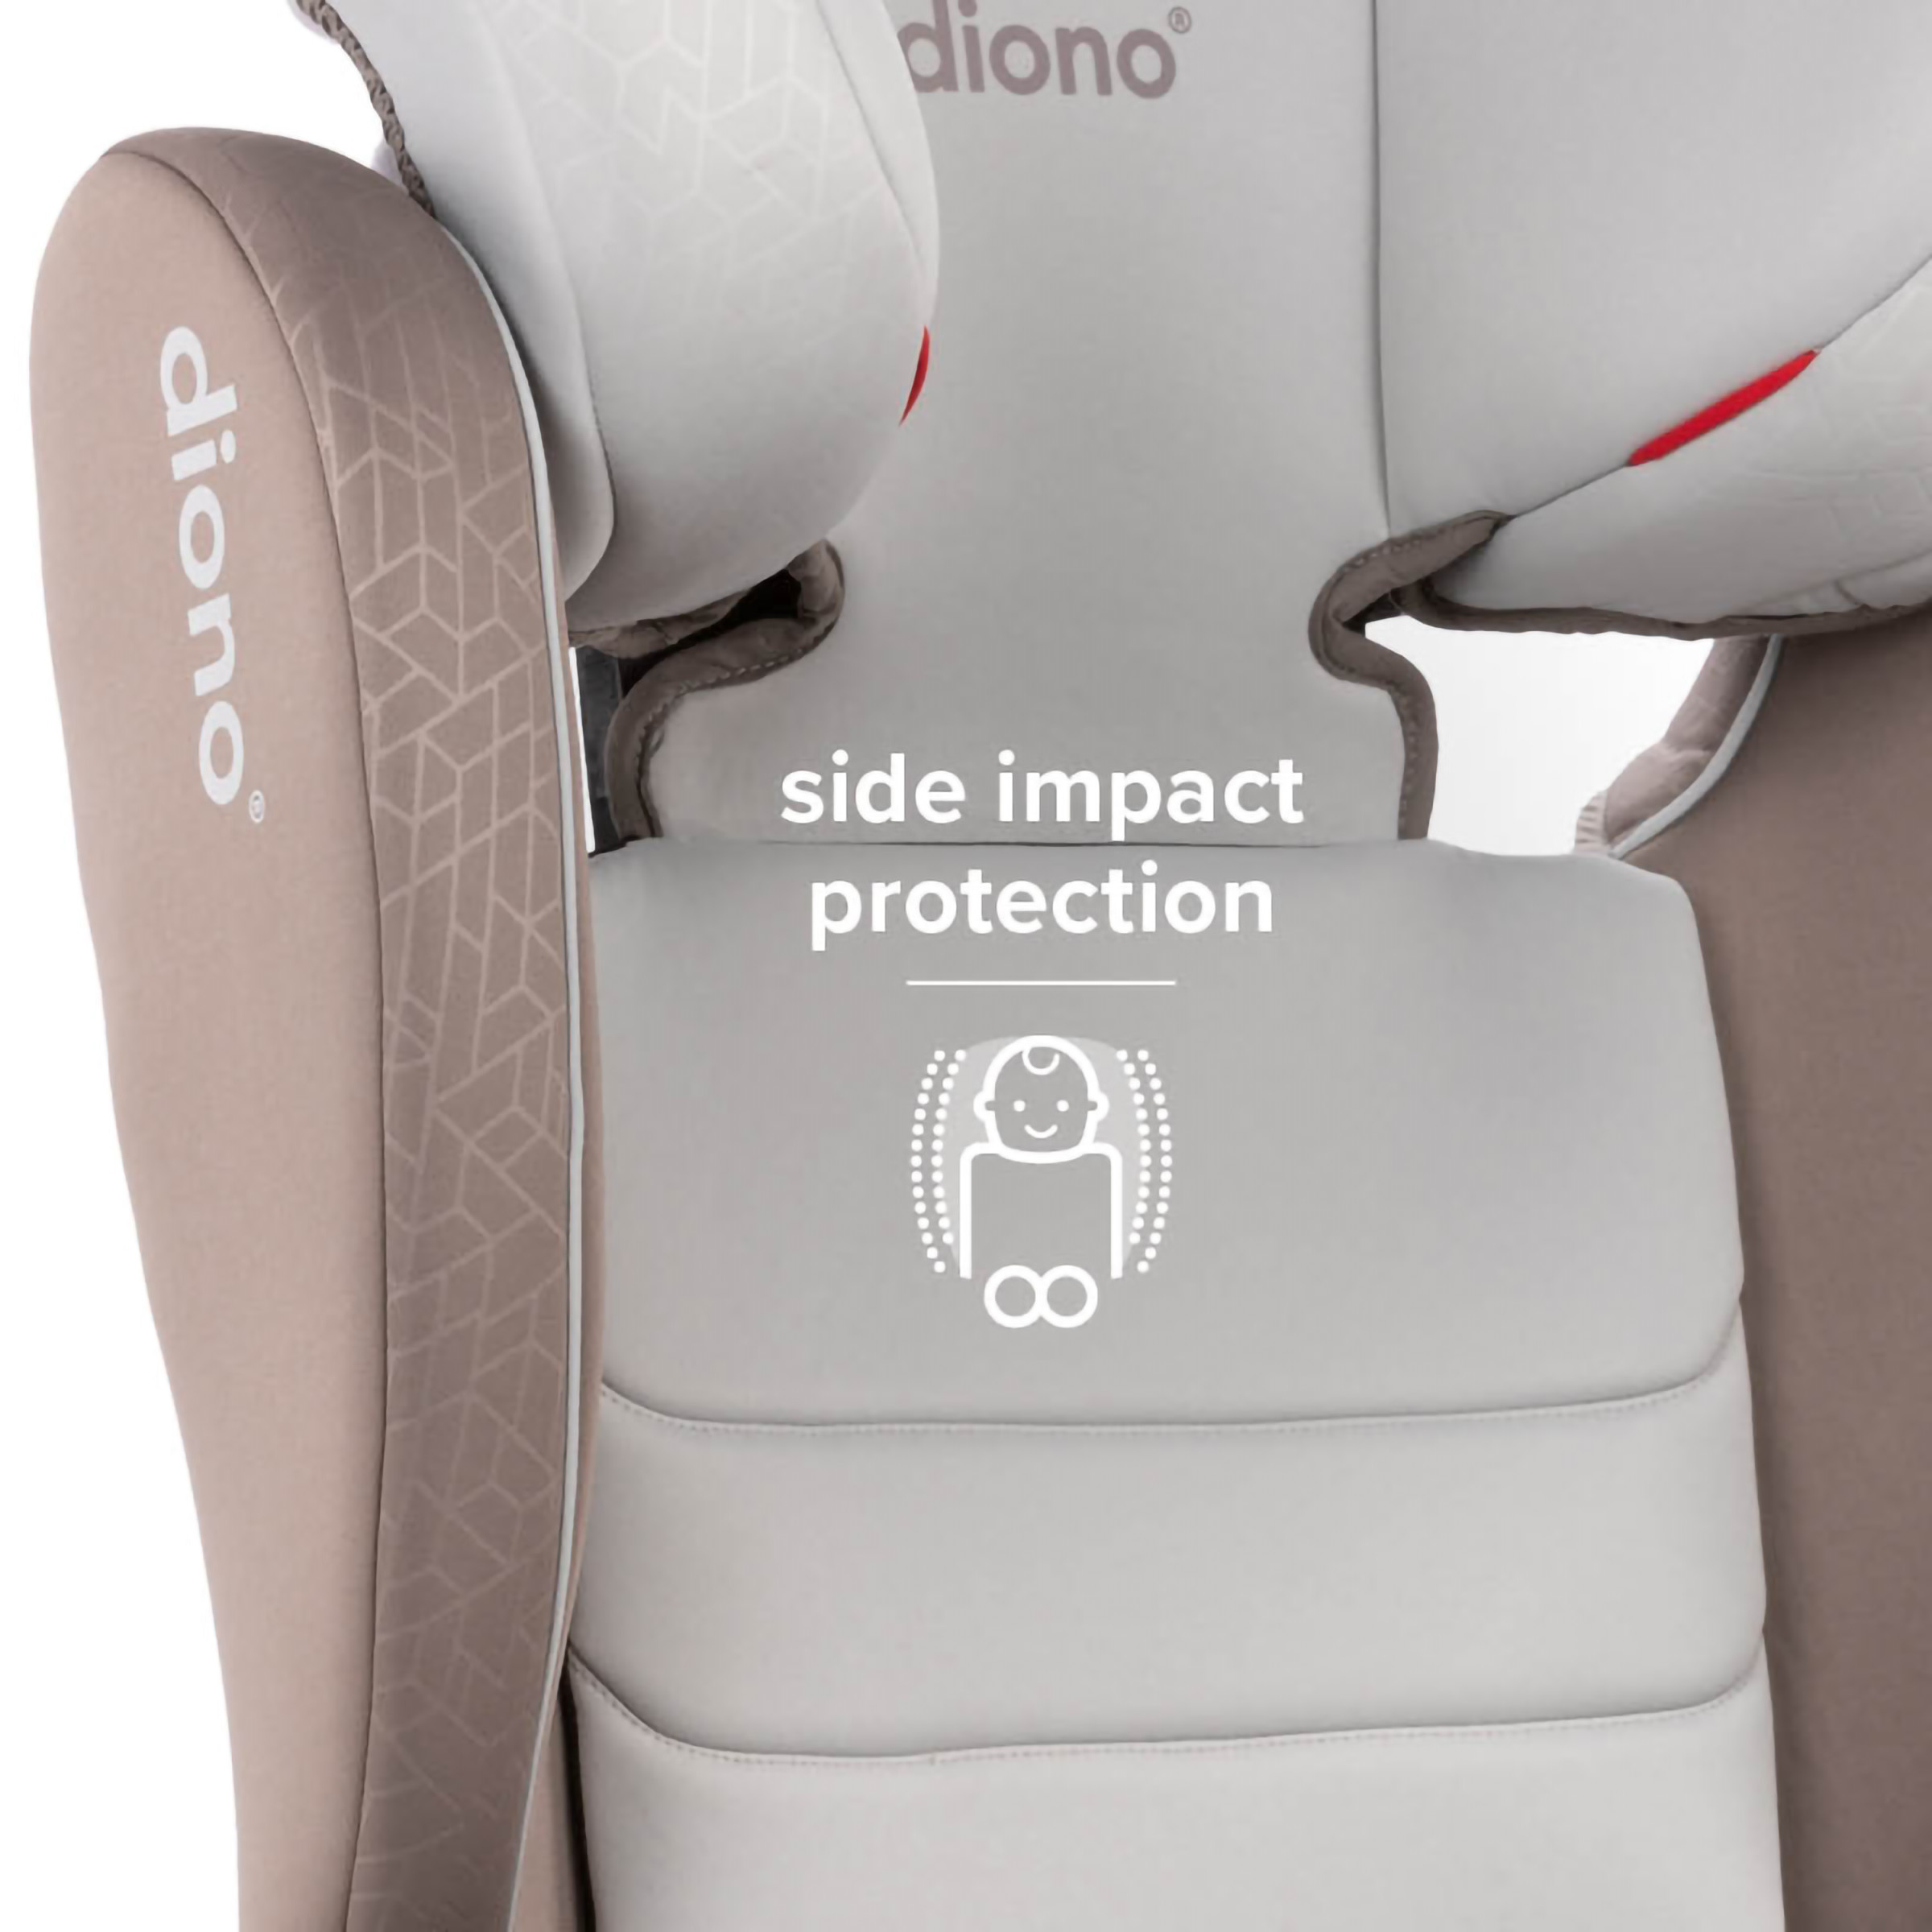 Diono Monterey XT Latch 2-in-1 Expandable Booster Car Seat, Gray Oyster - image 5 of 13